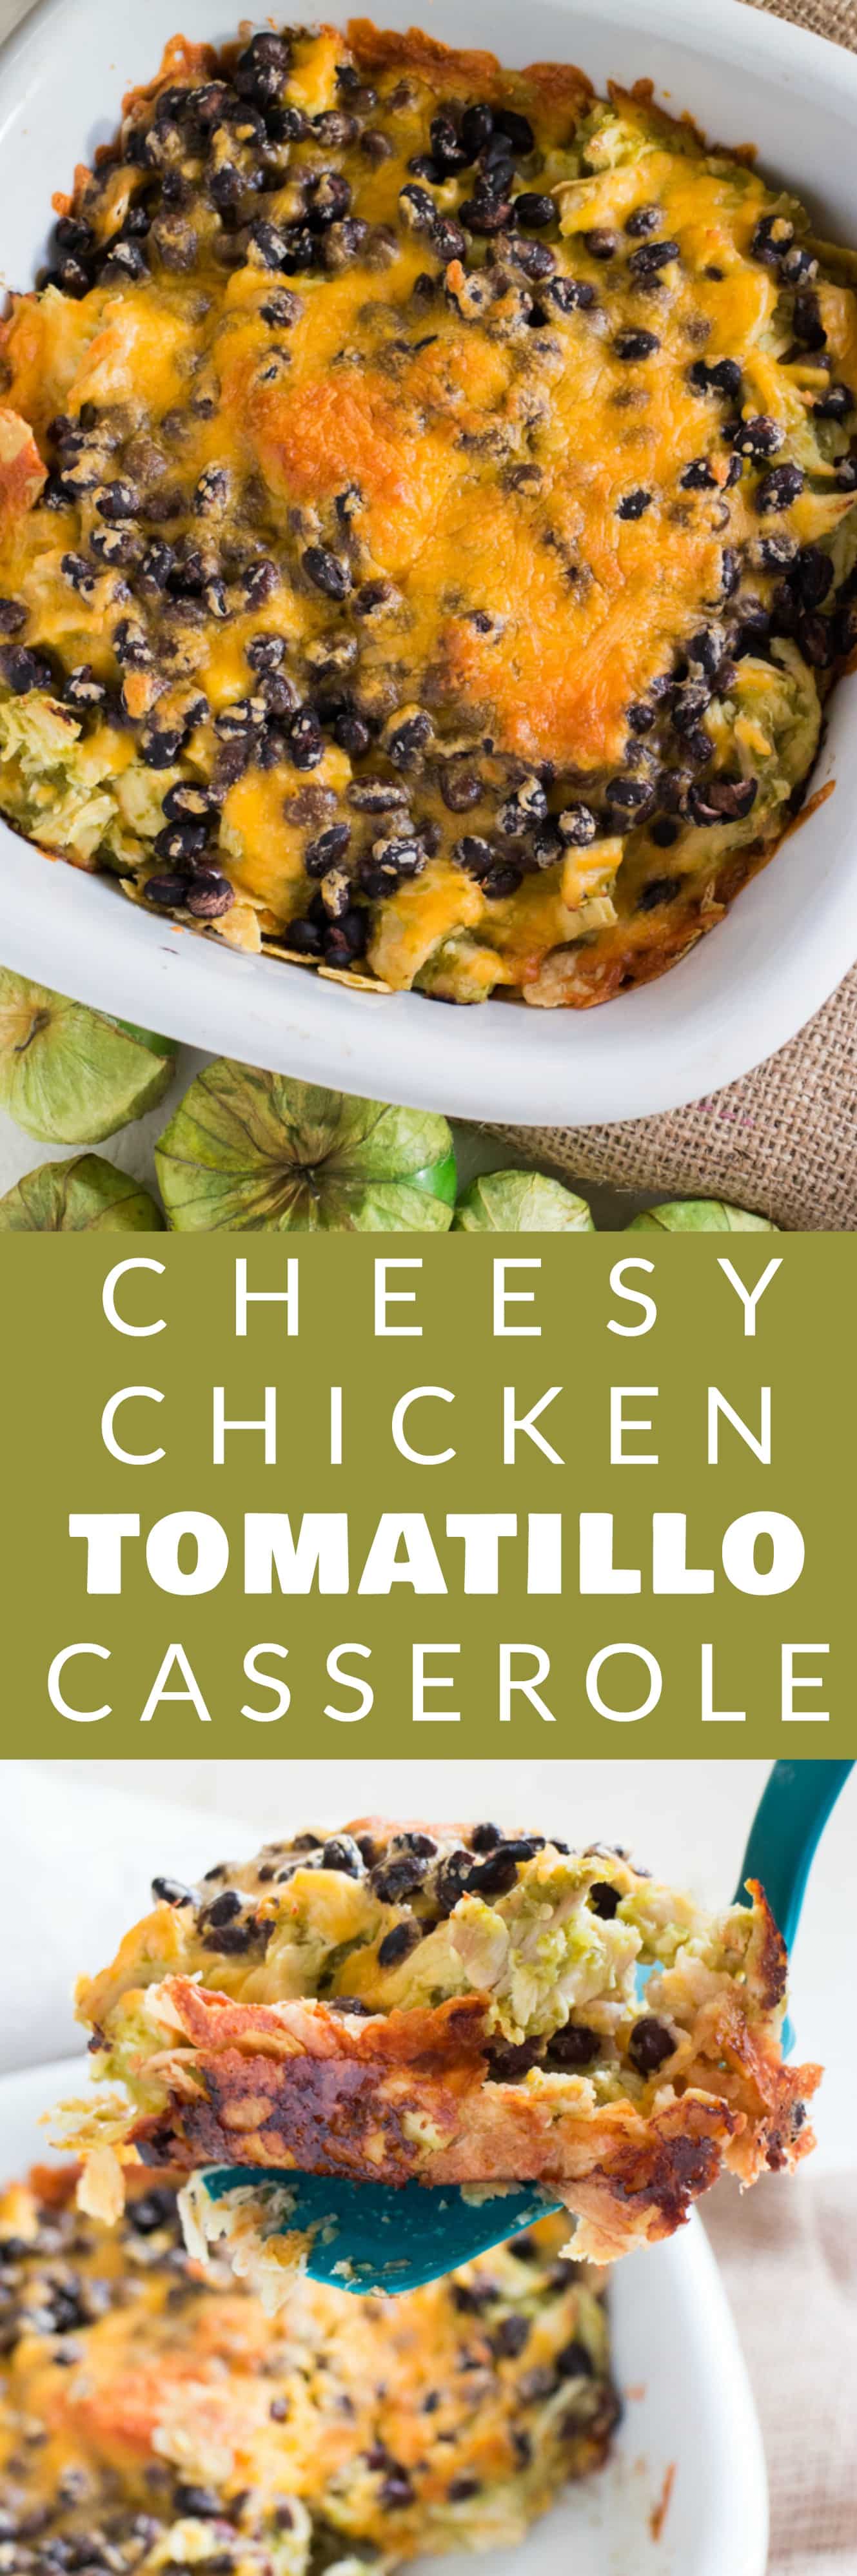 CHEESY Chicken Tomatillo Casserole recipe! This easy Mexican dinner casserole uses 1 pound of tomatillos to make a creamy sauce that is layered with tortilla chips, chicken, black beans and cheddar cheese! I love to make this simple dish when my garden tomatillo plants give me too much and I'm left asking asking "What to do!".